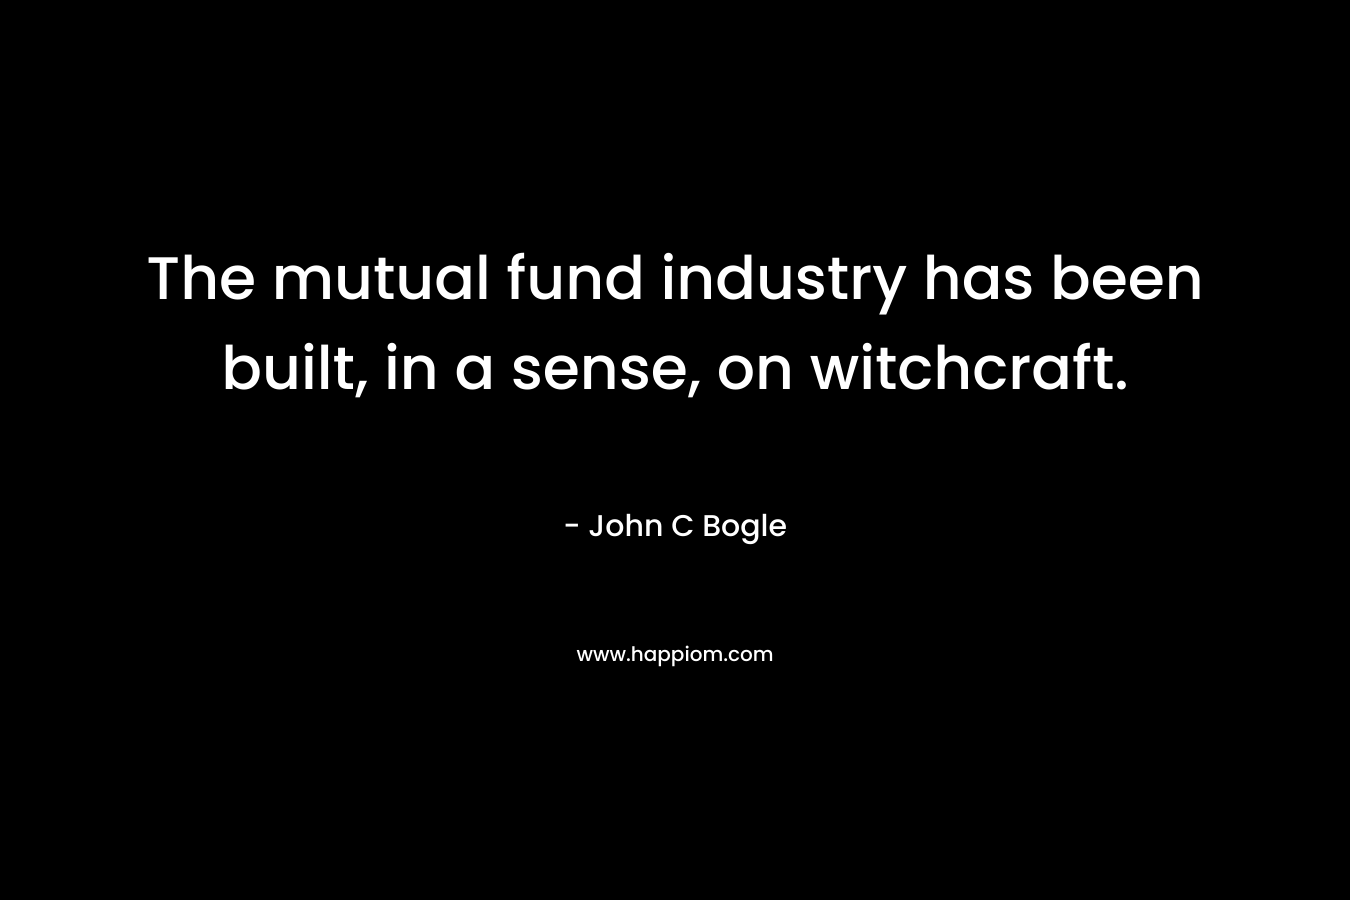 The mutual fund industry has been built, in a sense, on witchcraft. – John C Bogle